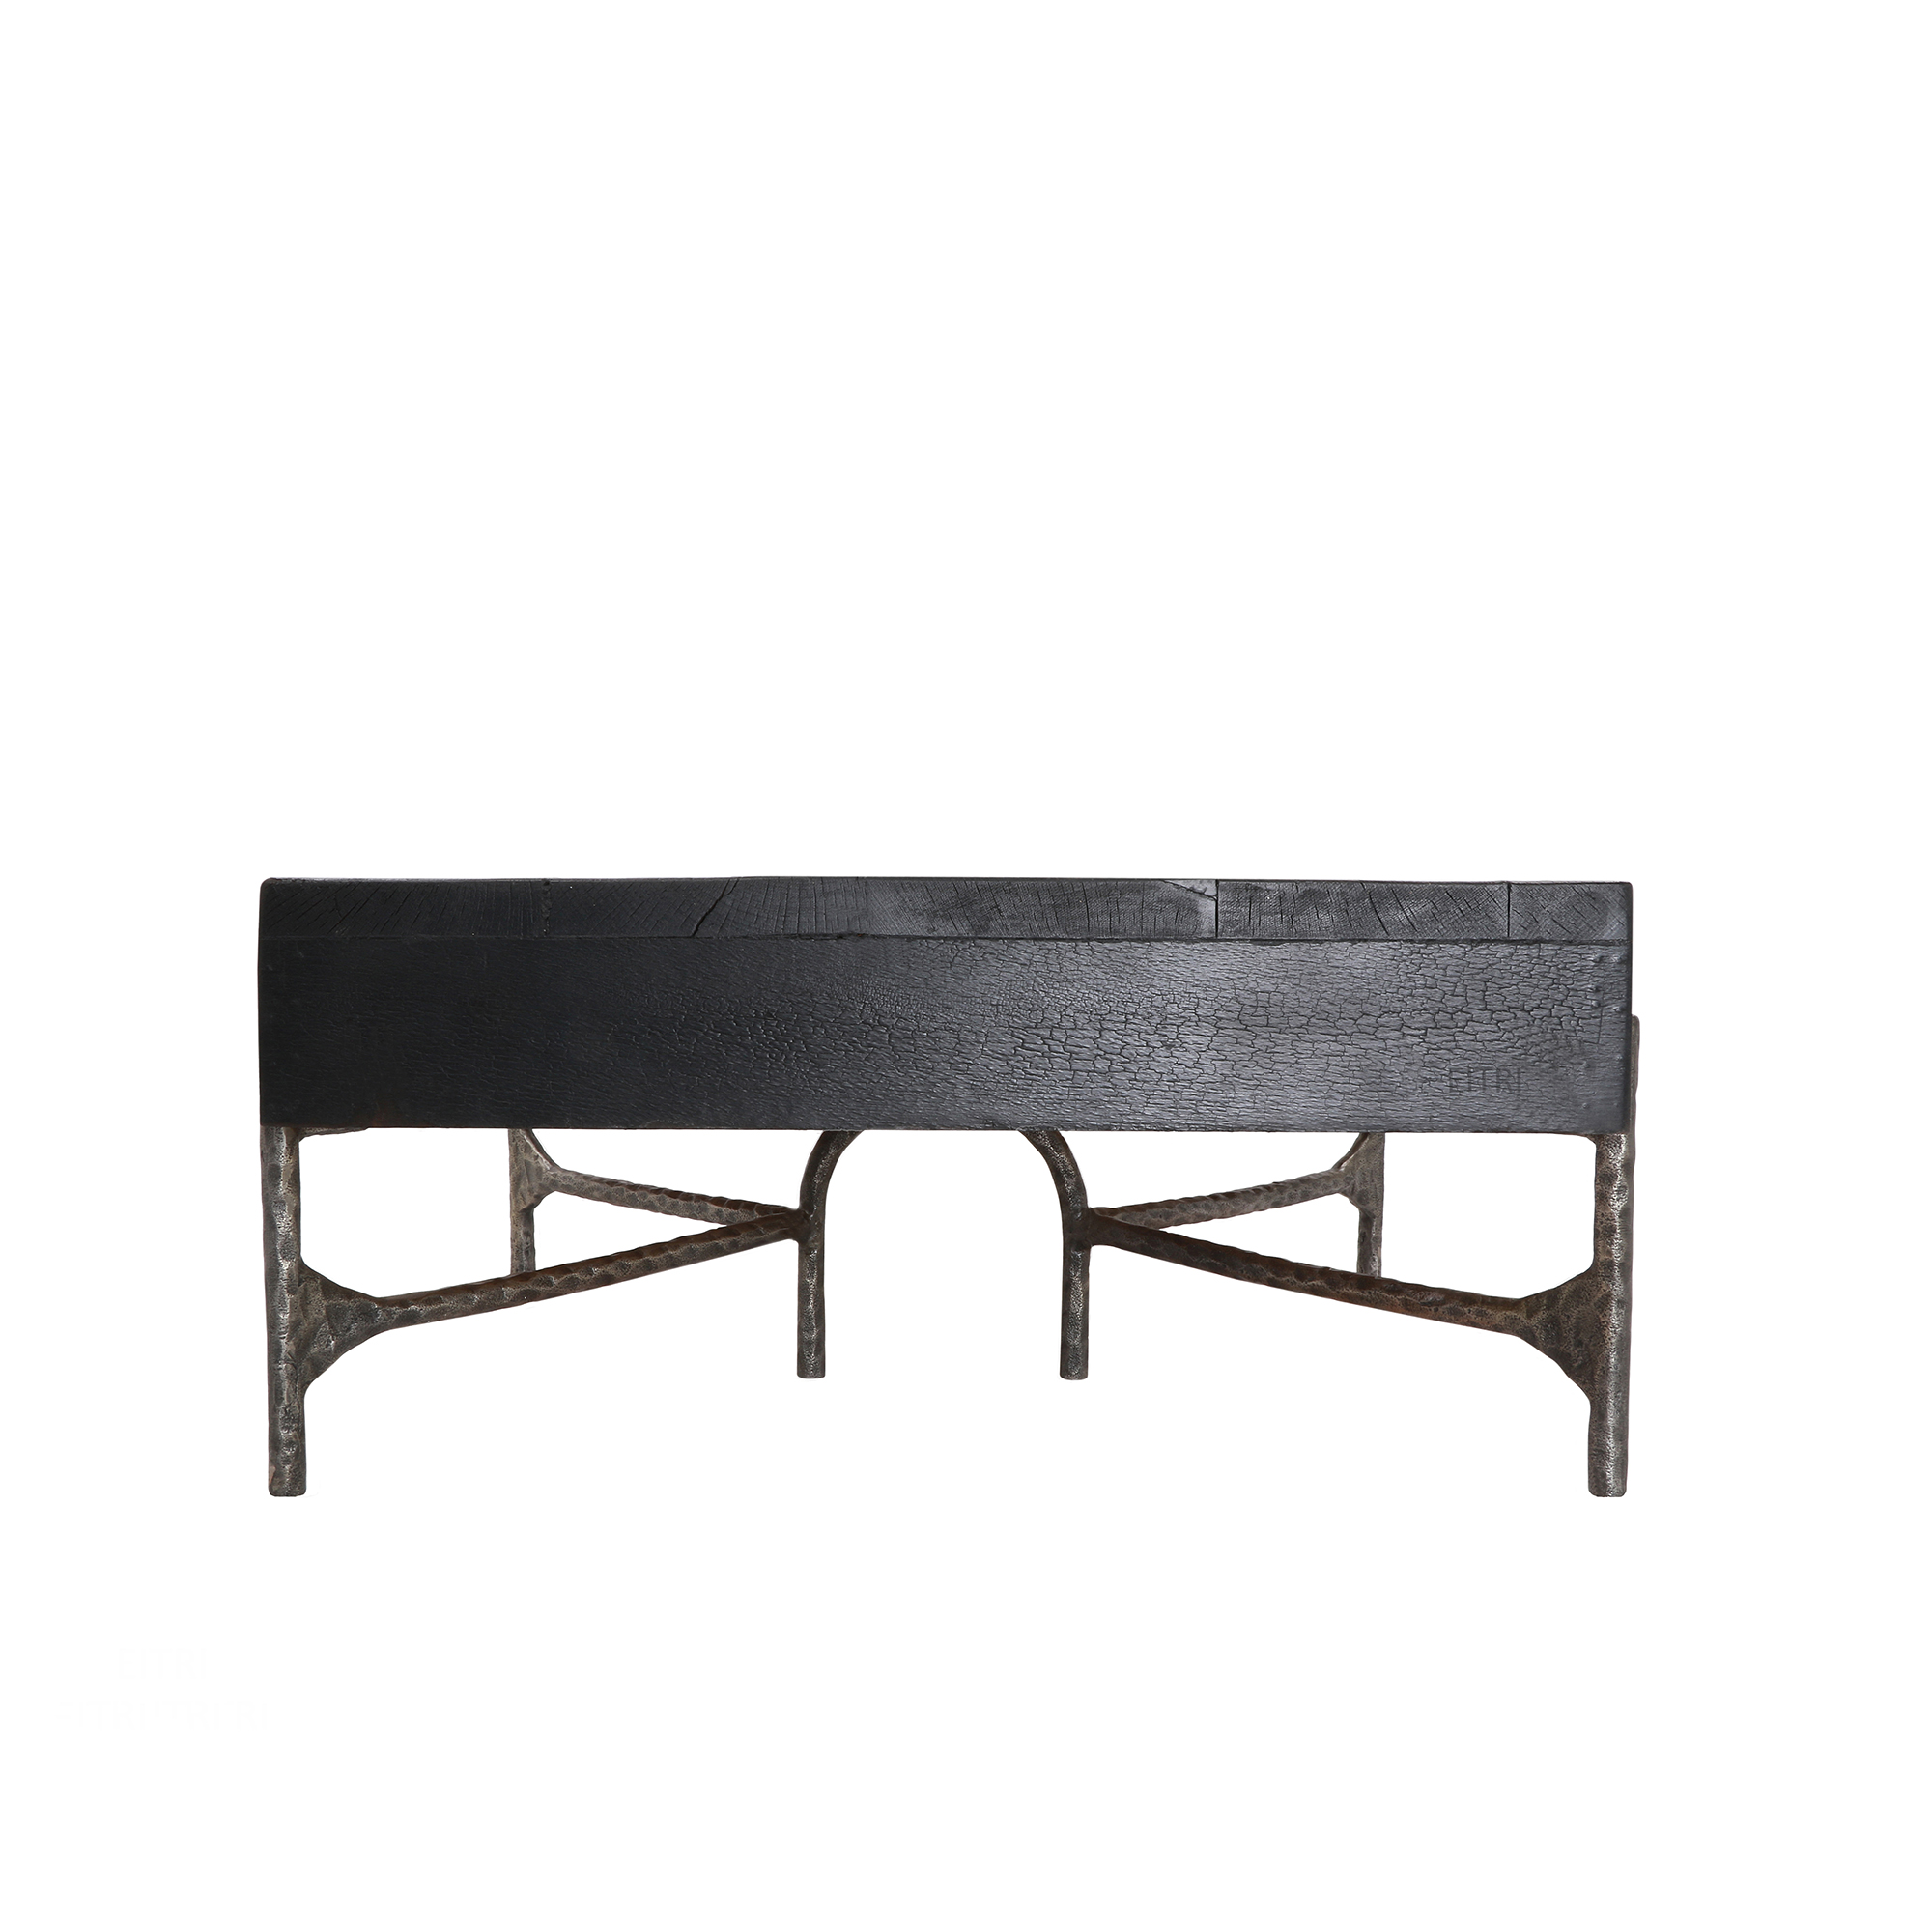  Carbon-12 Coffee Table Square